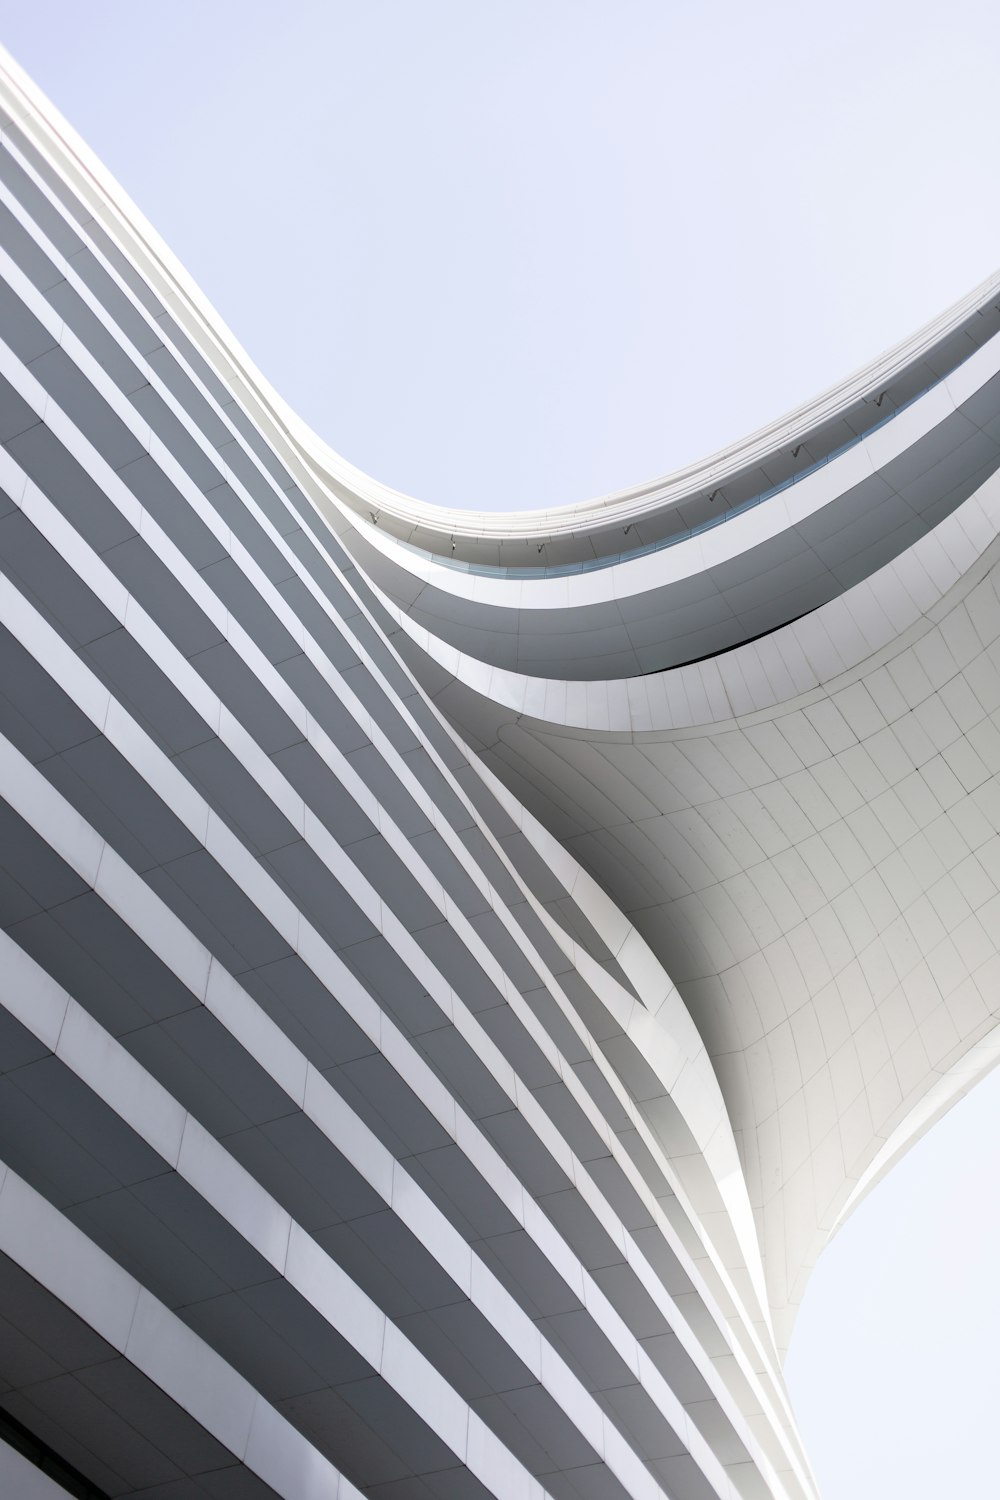 a curved building with a sky background